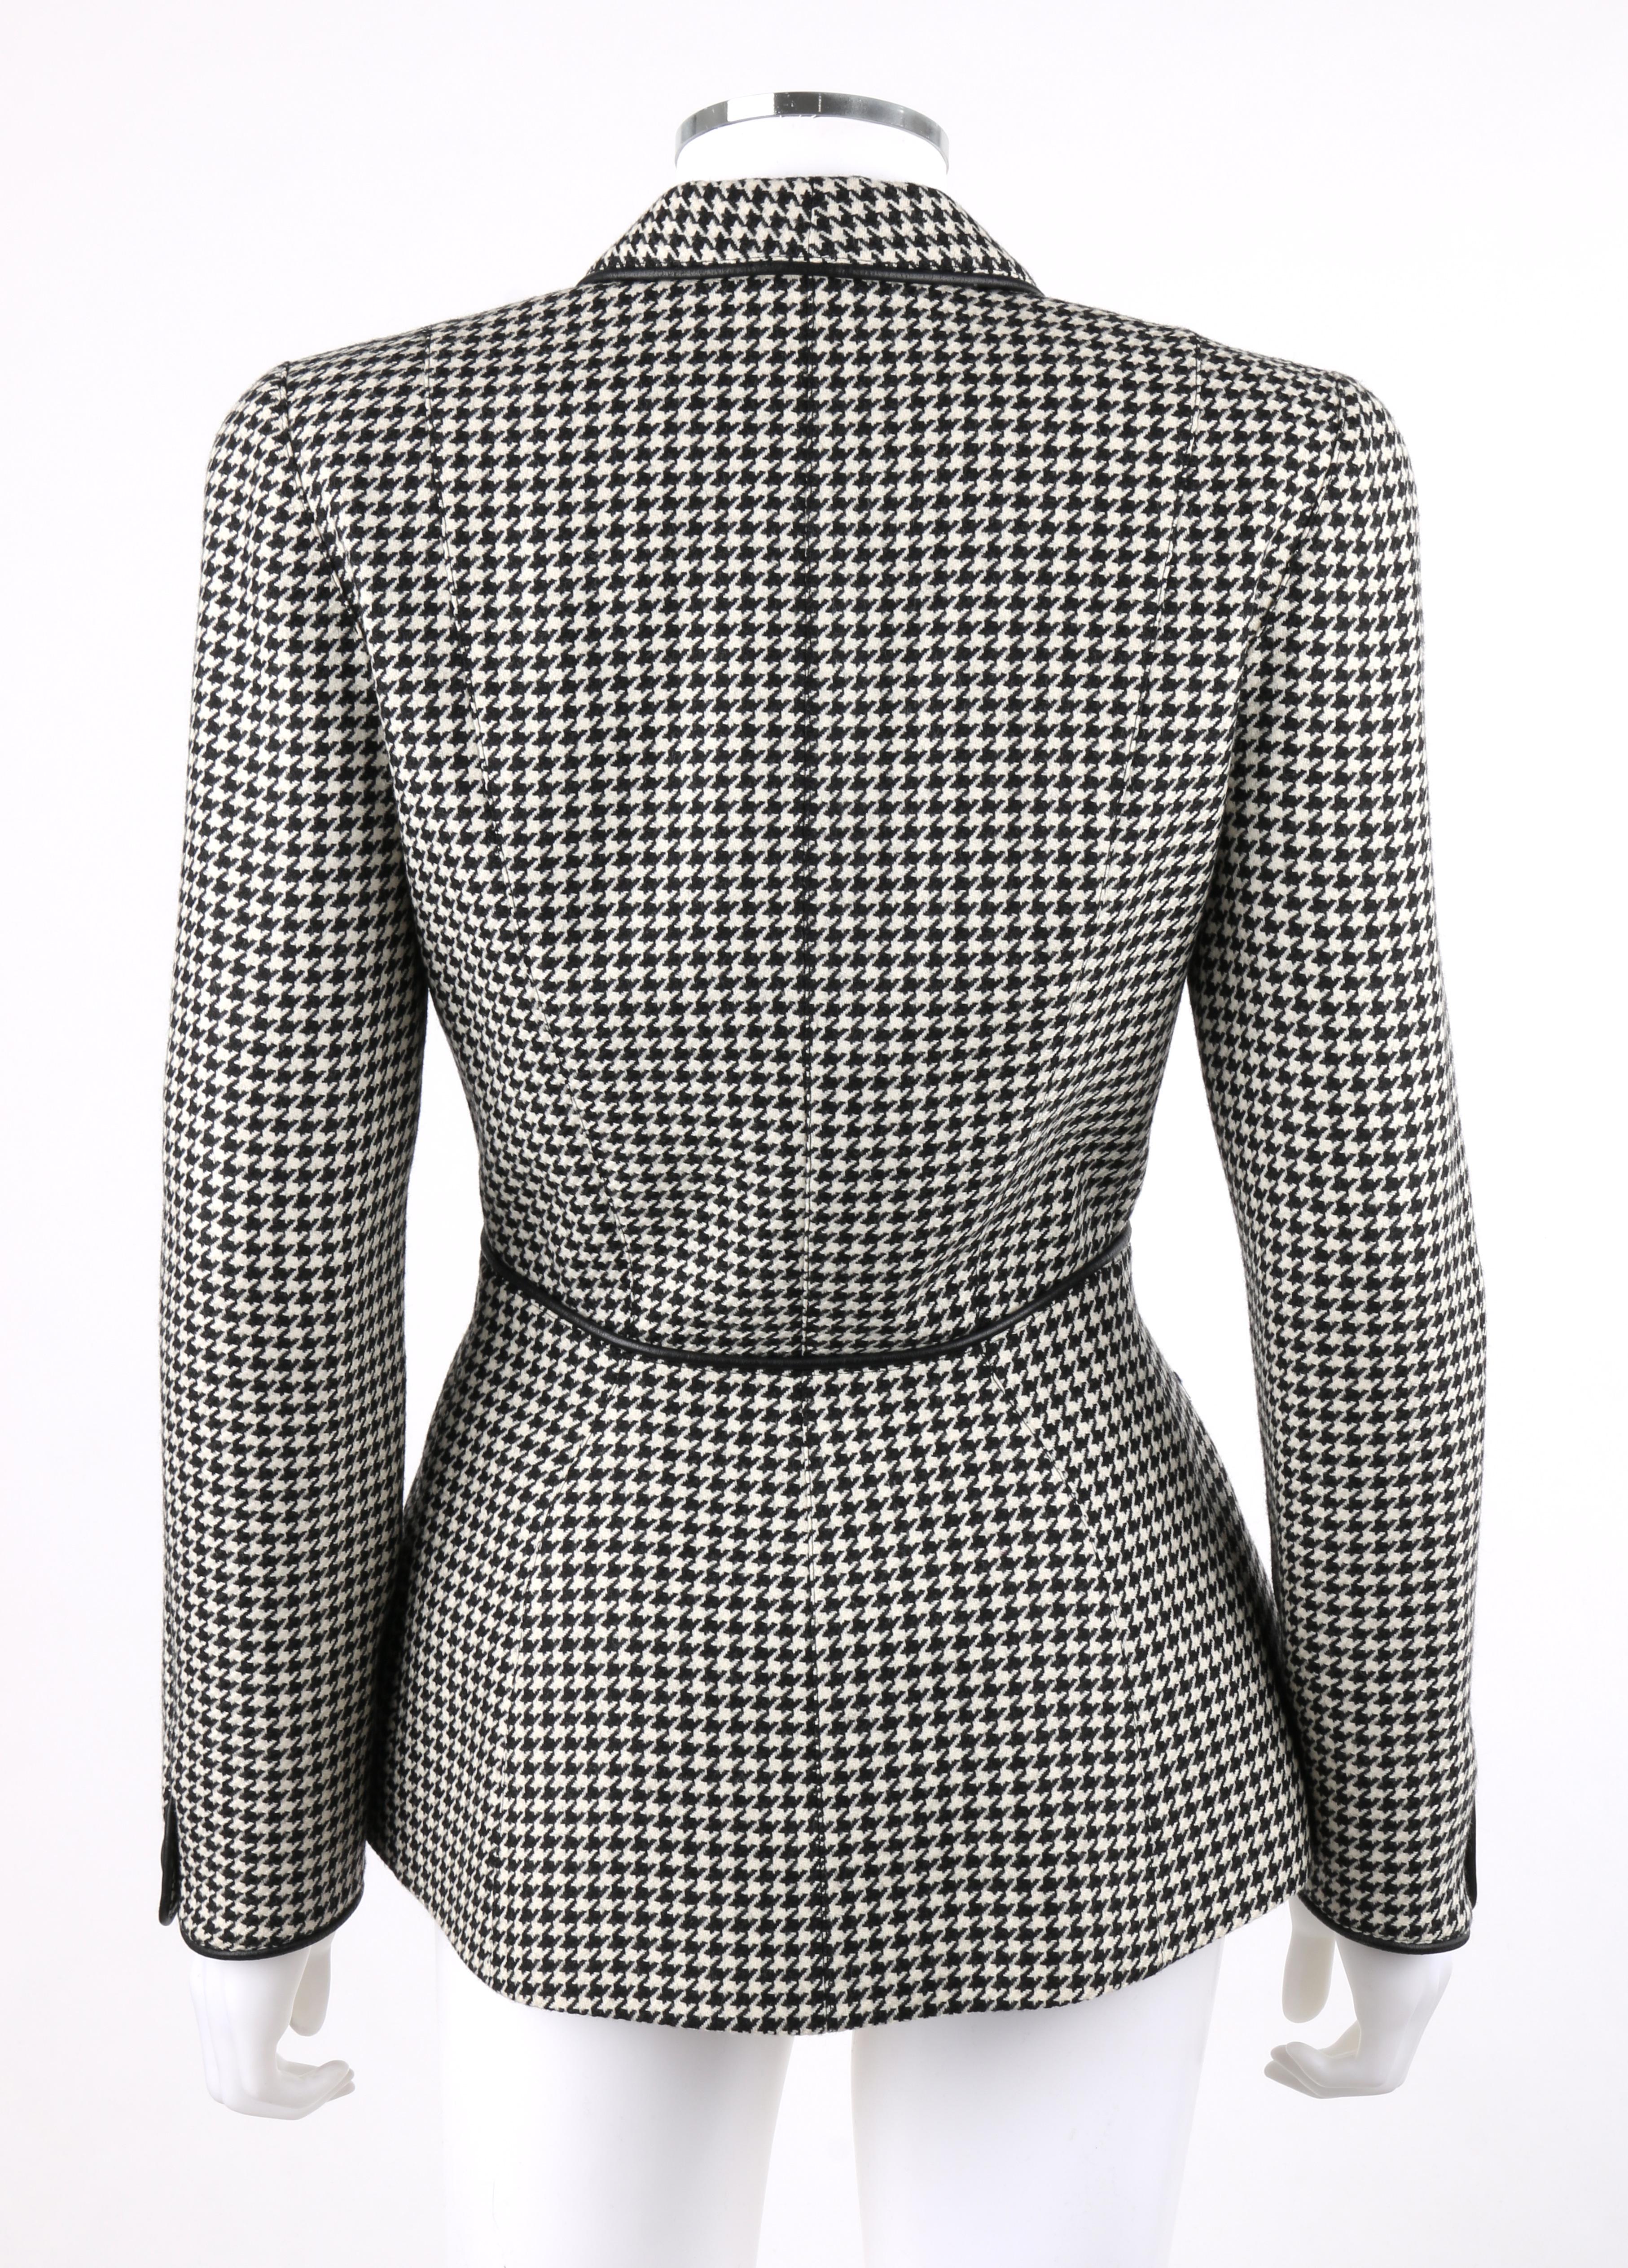 Women's THIERRY MUGLER c.1980’s Black White Houndstooth Dogtooth Fitted Wool Blazer 